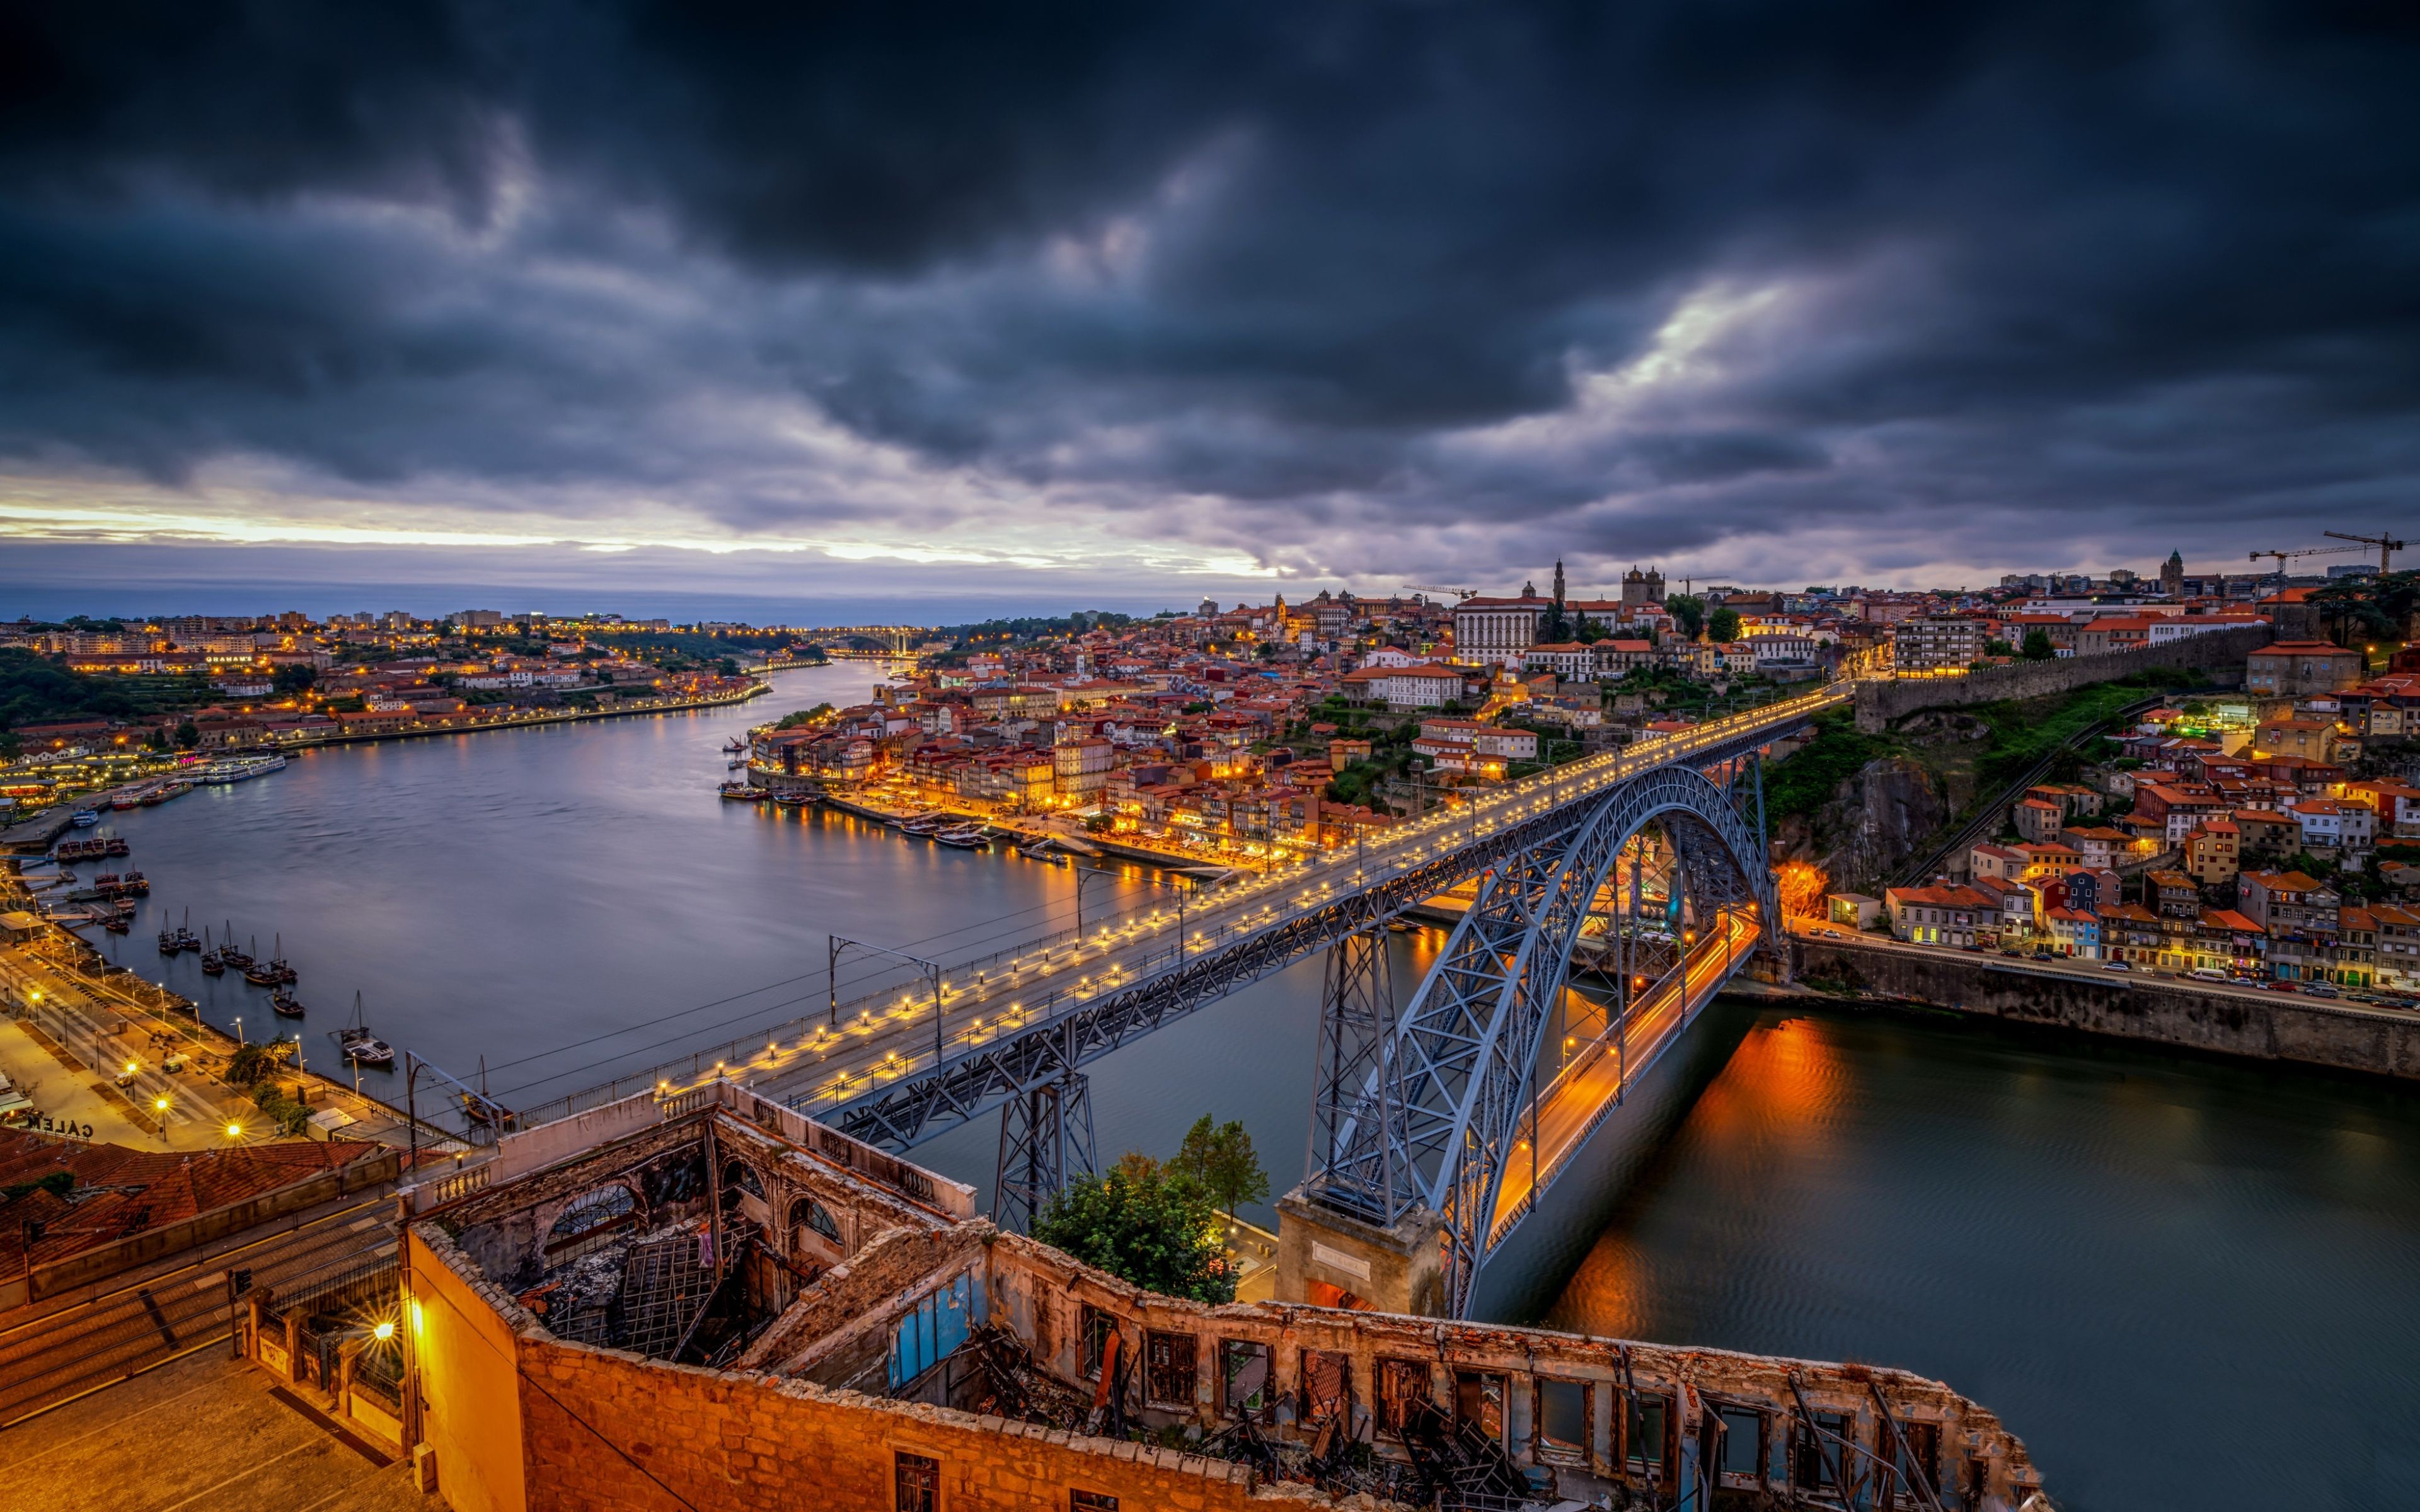 Download wallpaper Porto, Dom Luis I Bridge, 4k, evening city, Portugal, Europe for desktop with resolution 3840x2400. High Quality HD picture wallpaper